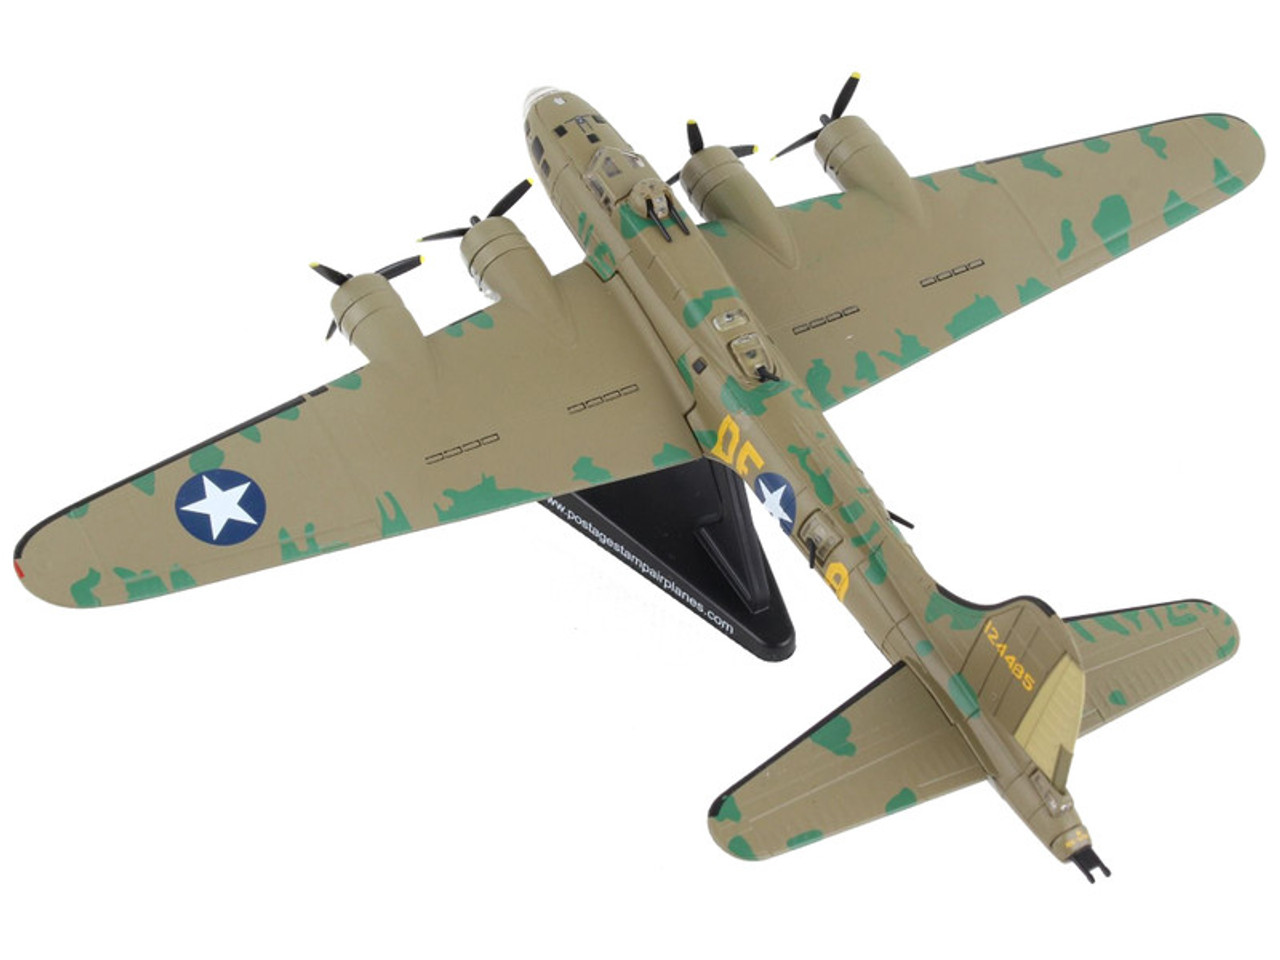 Boeing B-17F Flying Fortress Bomber Aircraft "Memphis Belle" United States Army Air Corps 1/155 Diecast Model Airplane by Postage Stamp